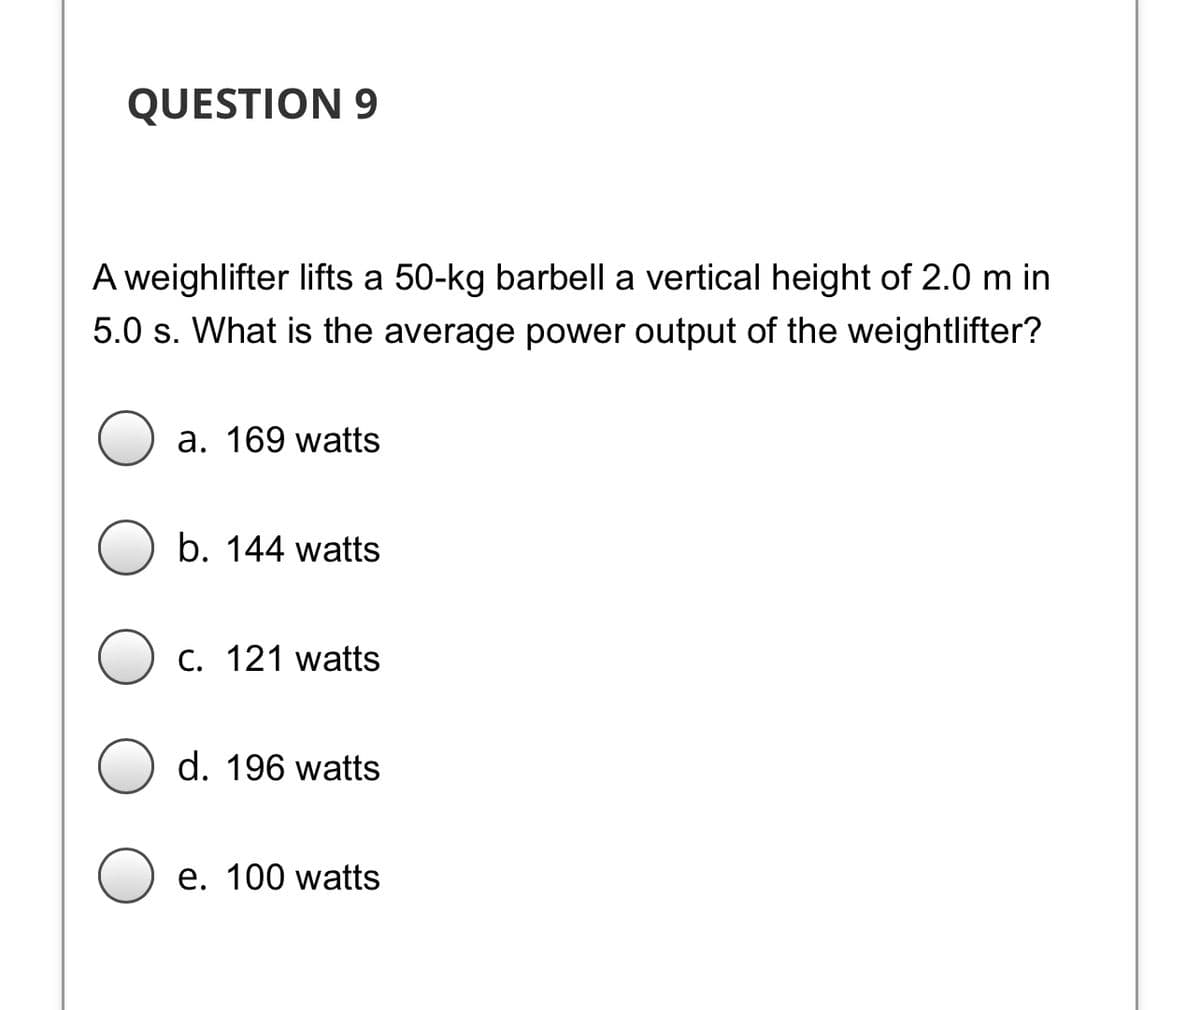 QUESTION 9
A weighlifter lifts a 50-kg barbell a vertical height of 2.0 m in
5.0 s. What is the average power output of the weightlifter?
a. 169 watts
b. 144 watts
C. 121 watts
d. 196 watts
e. 100 watts
